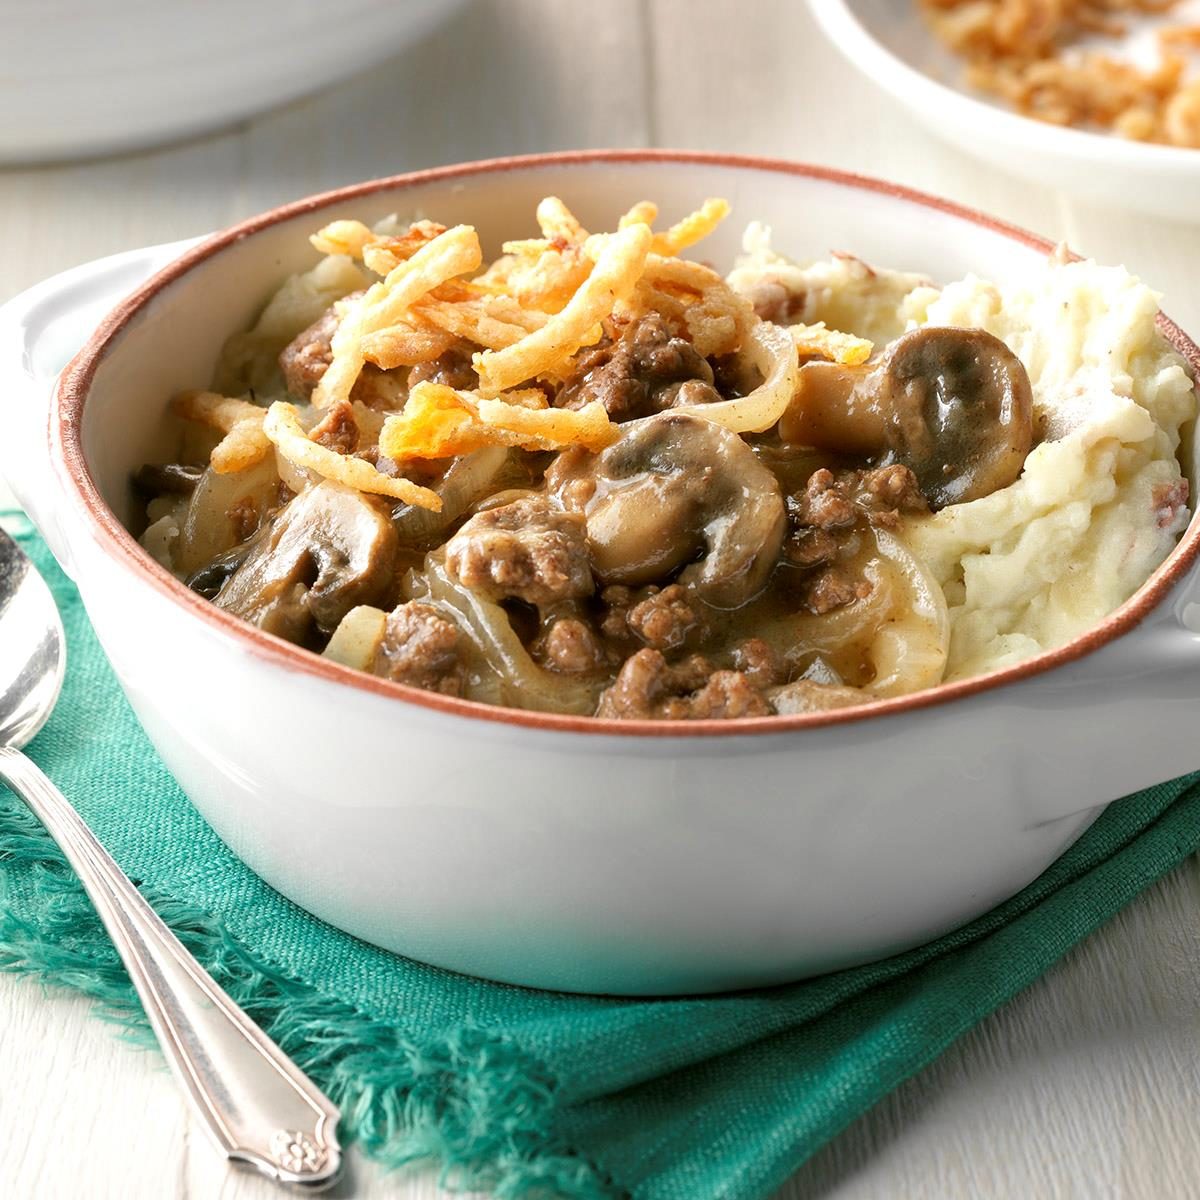 Beef And Mushrooms With Smashed Potatoes Exps Sdon17 191910 D06 30 2b 4